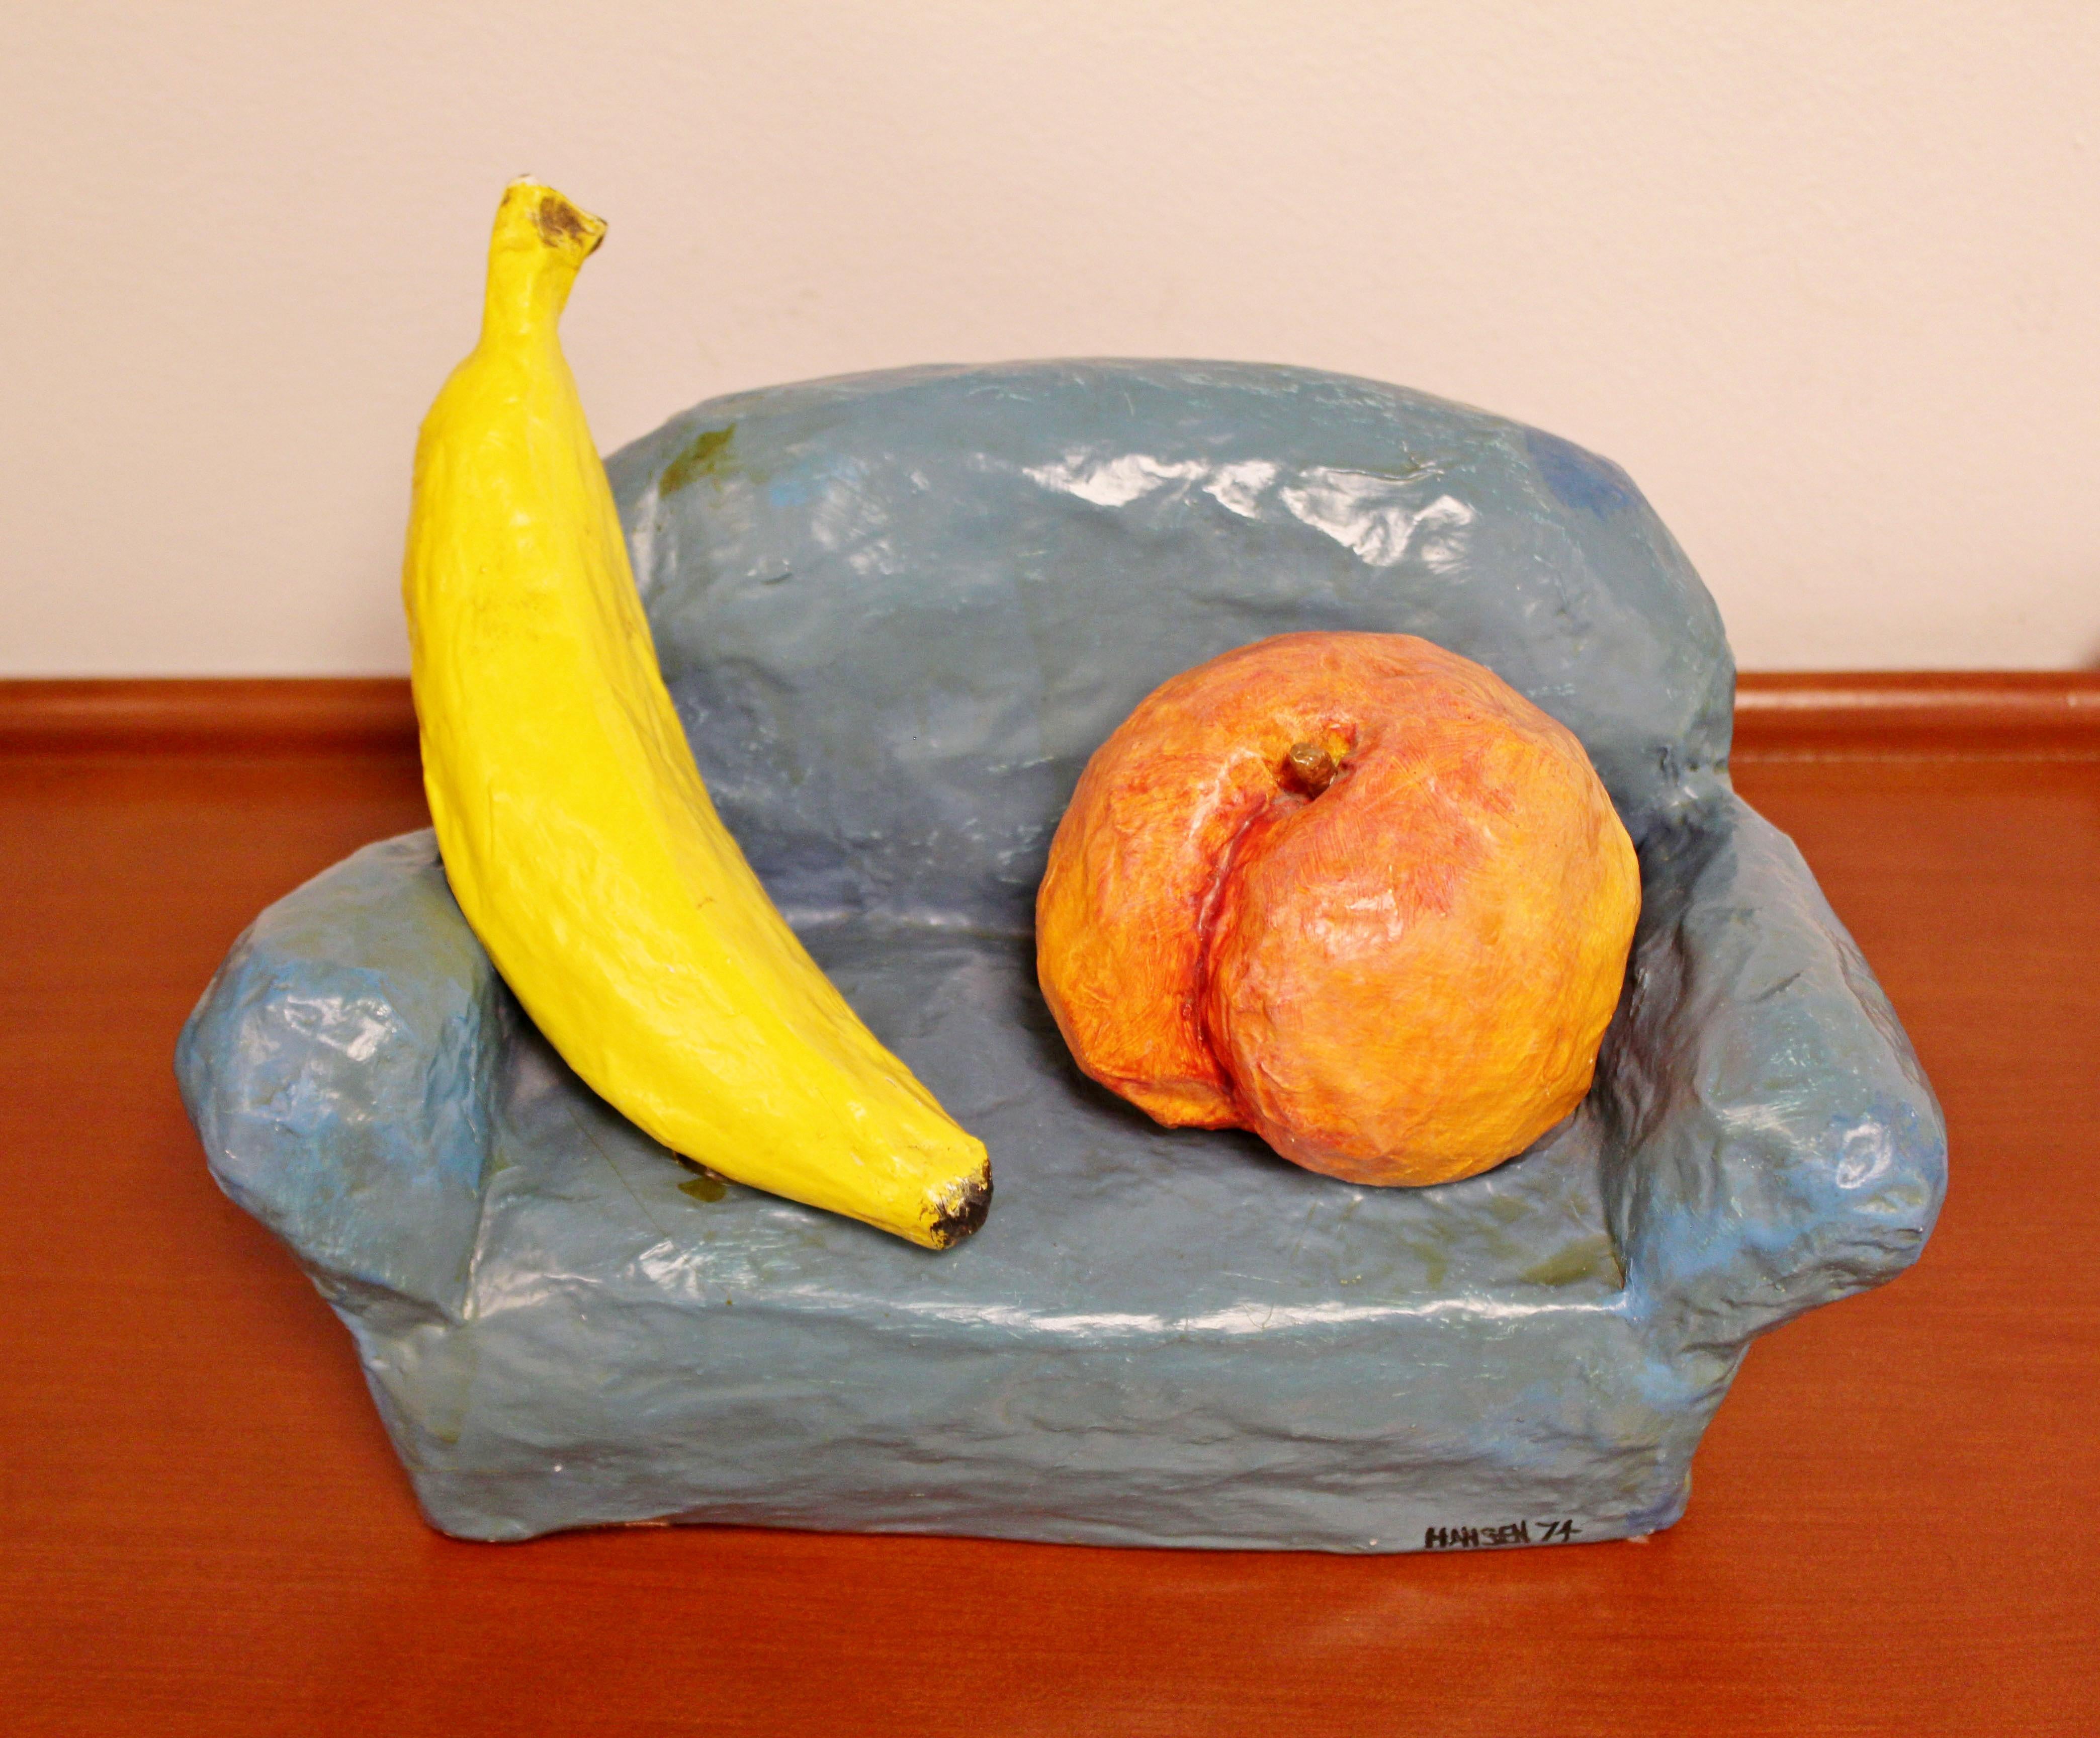 For your consideration is a whimsical, papier-mâché table sculpture of fruit on a sofa, entitled 